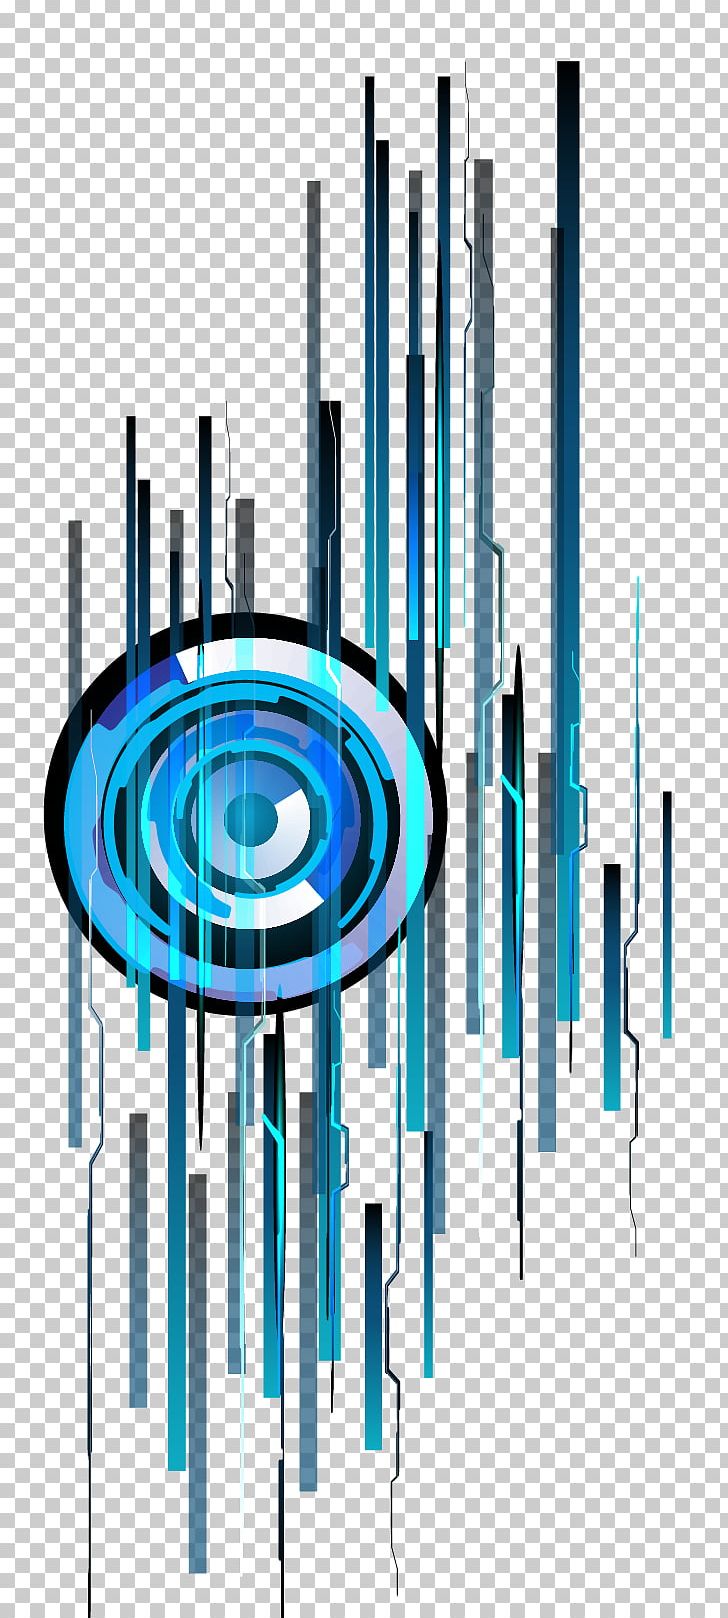 Circle Graphic Design PNG, Clipart, Blue, Border, Border Frame, Certificate Border, Circle Frame Free PNG Download